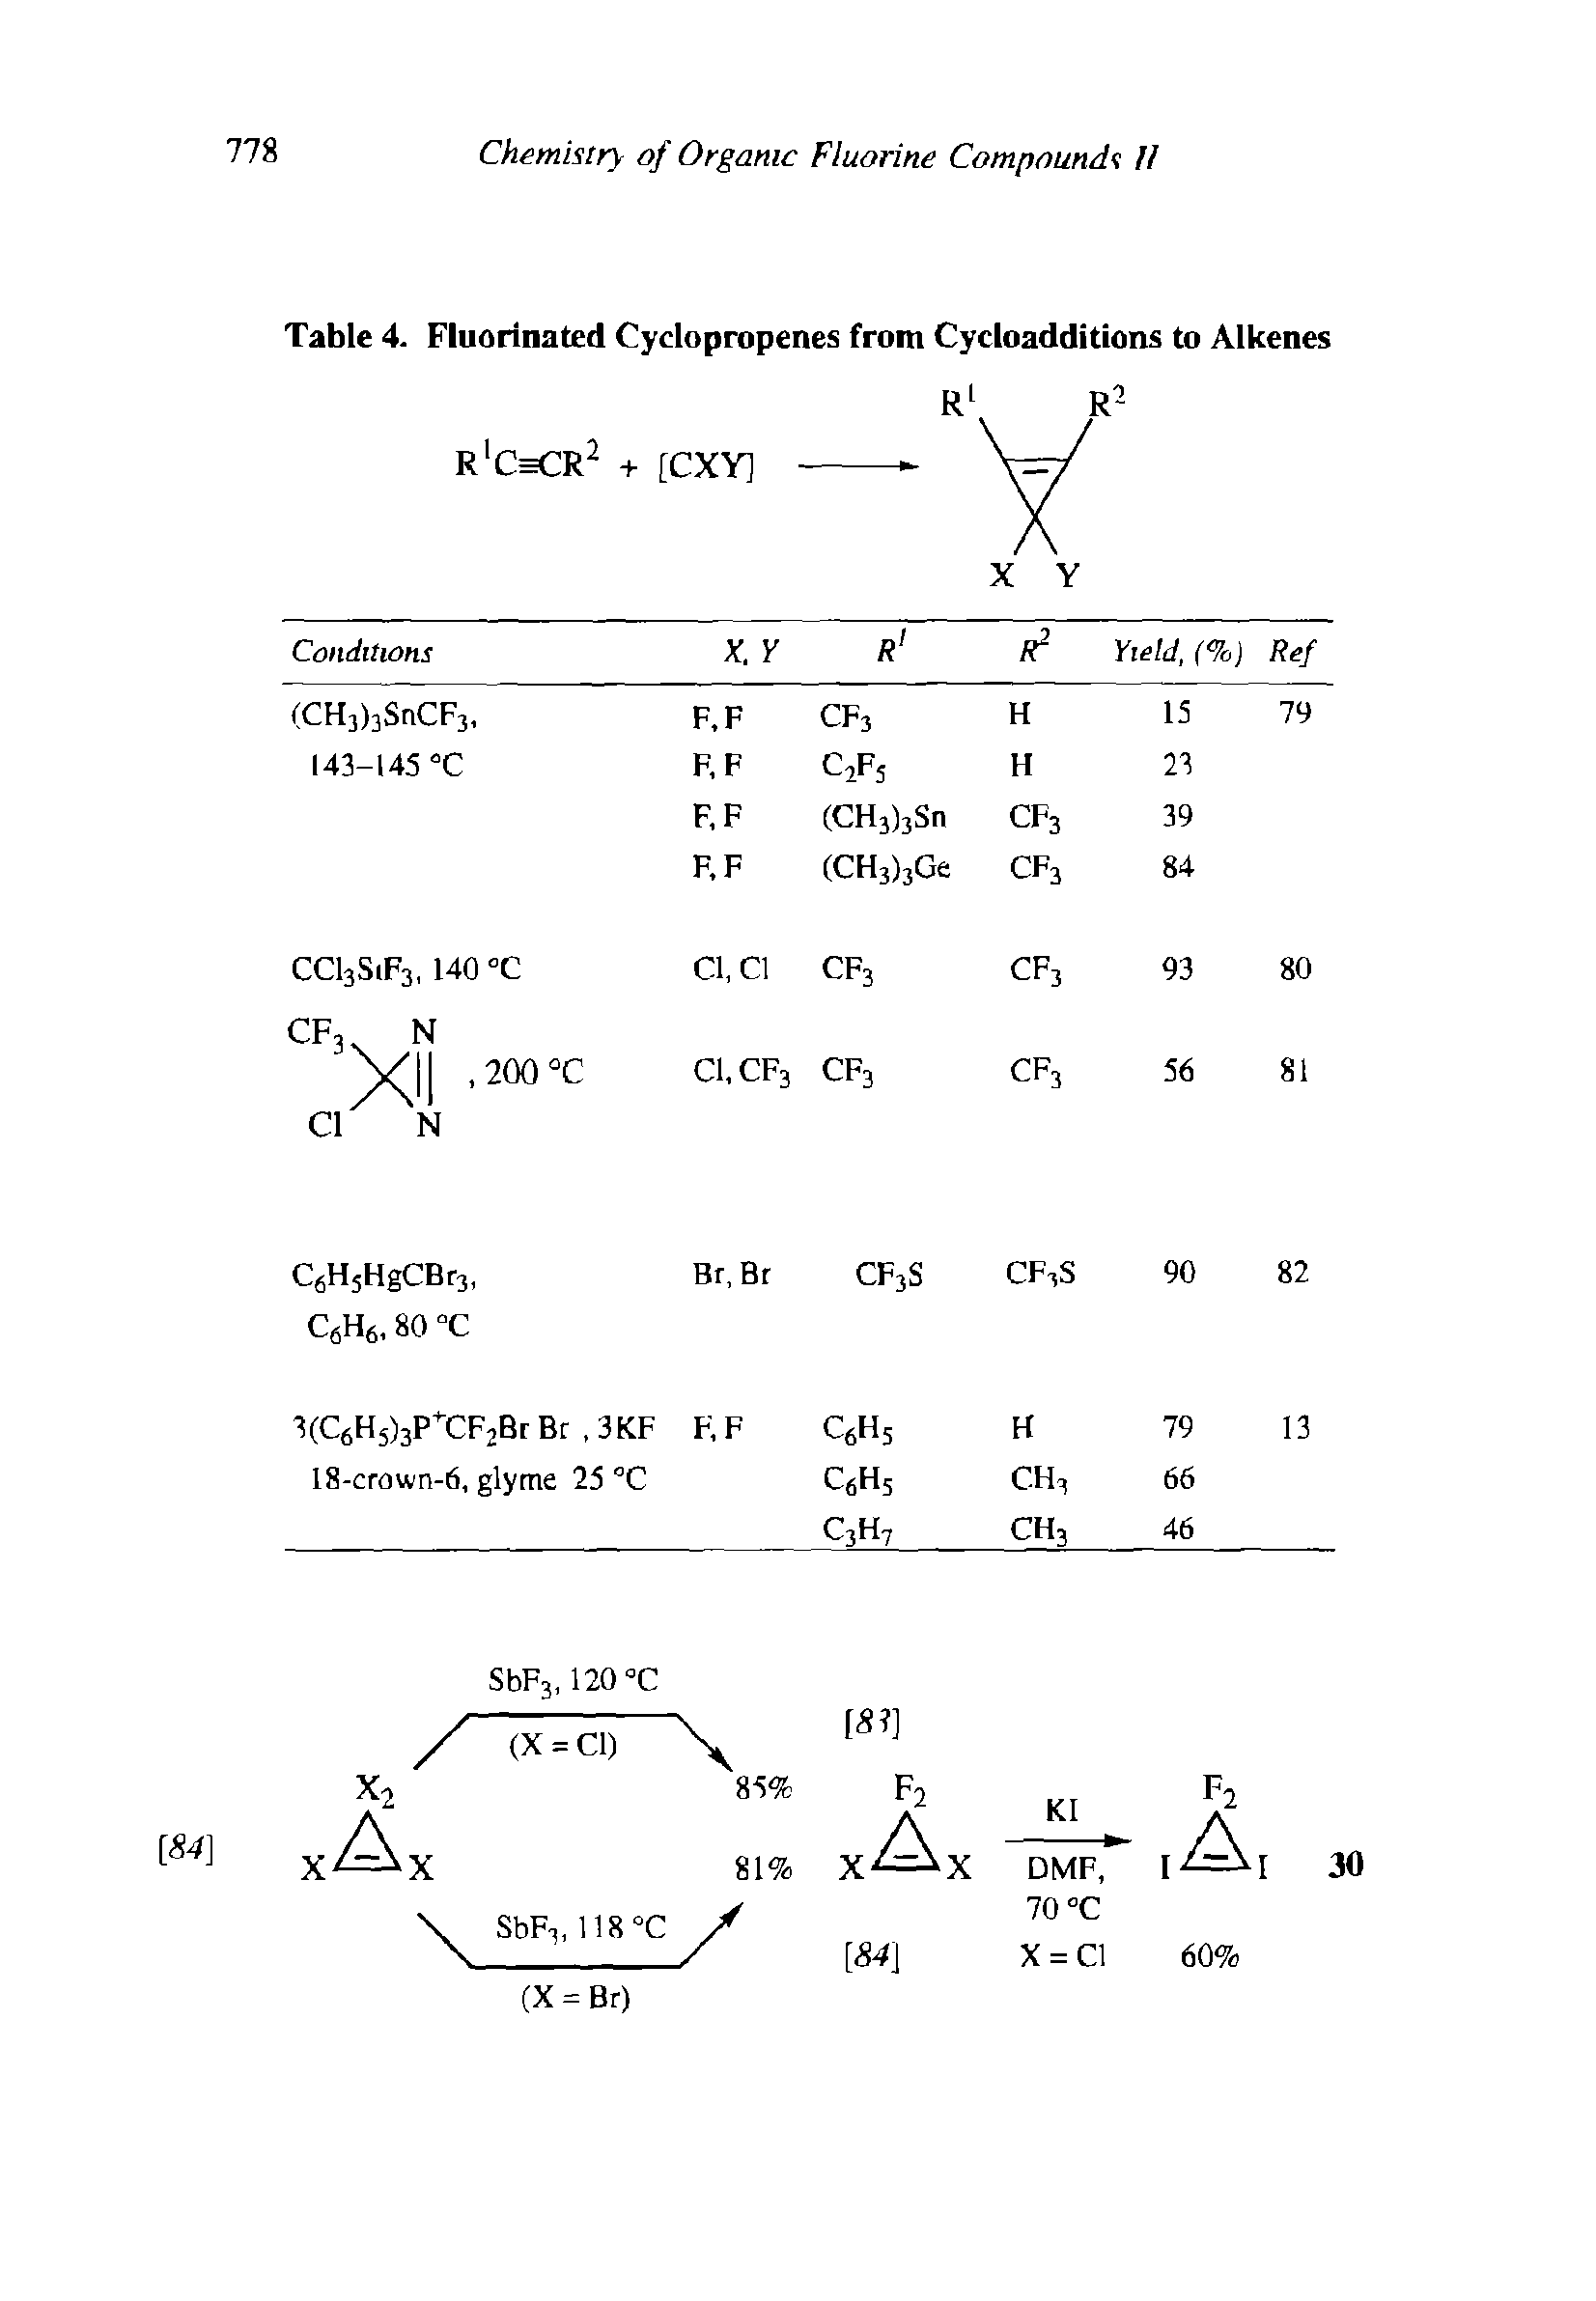 Table 4. Fluorinated Cyclopropenes from Cydoadditions to Alkenes...